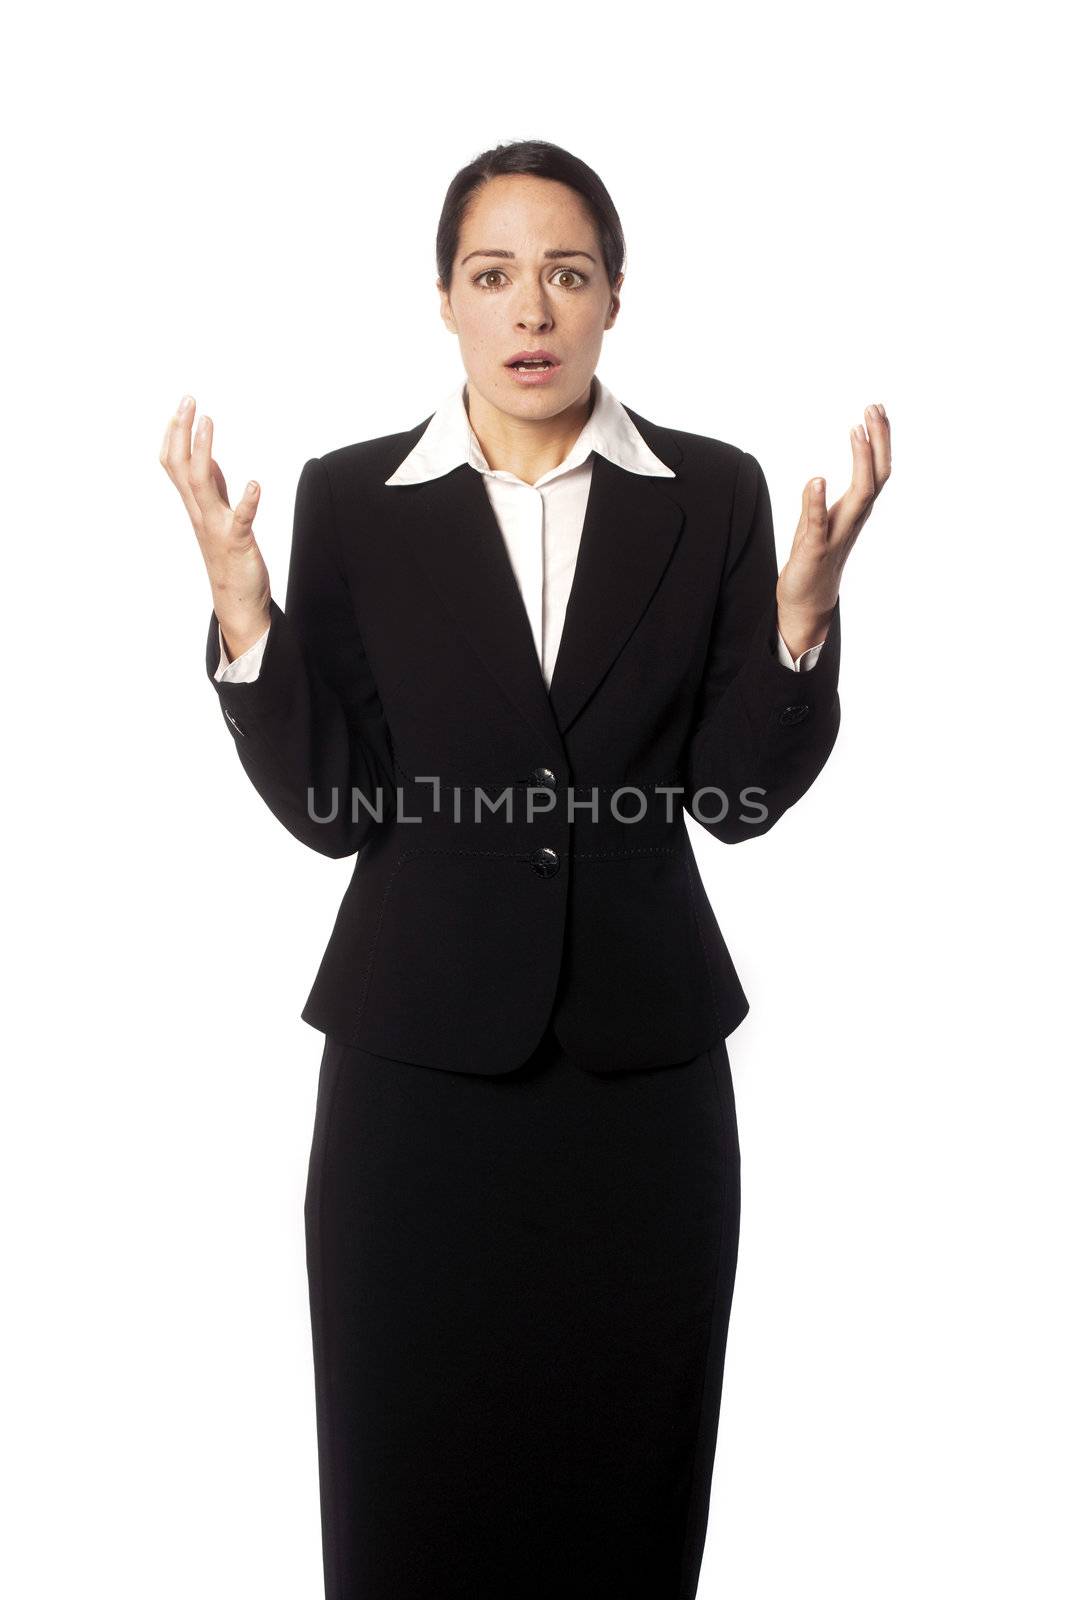 Business woman by hypestock